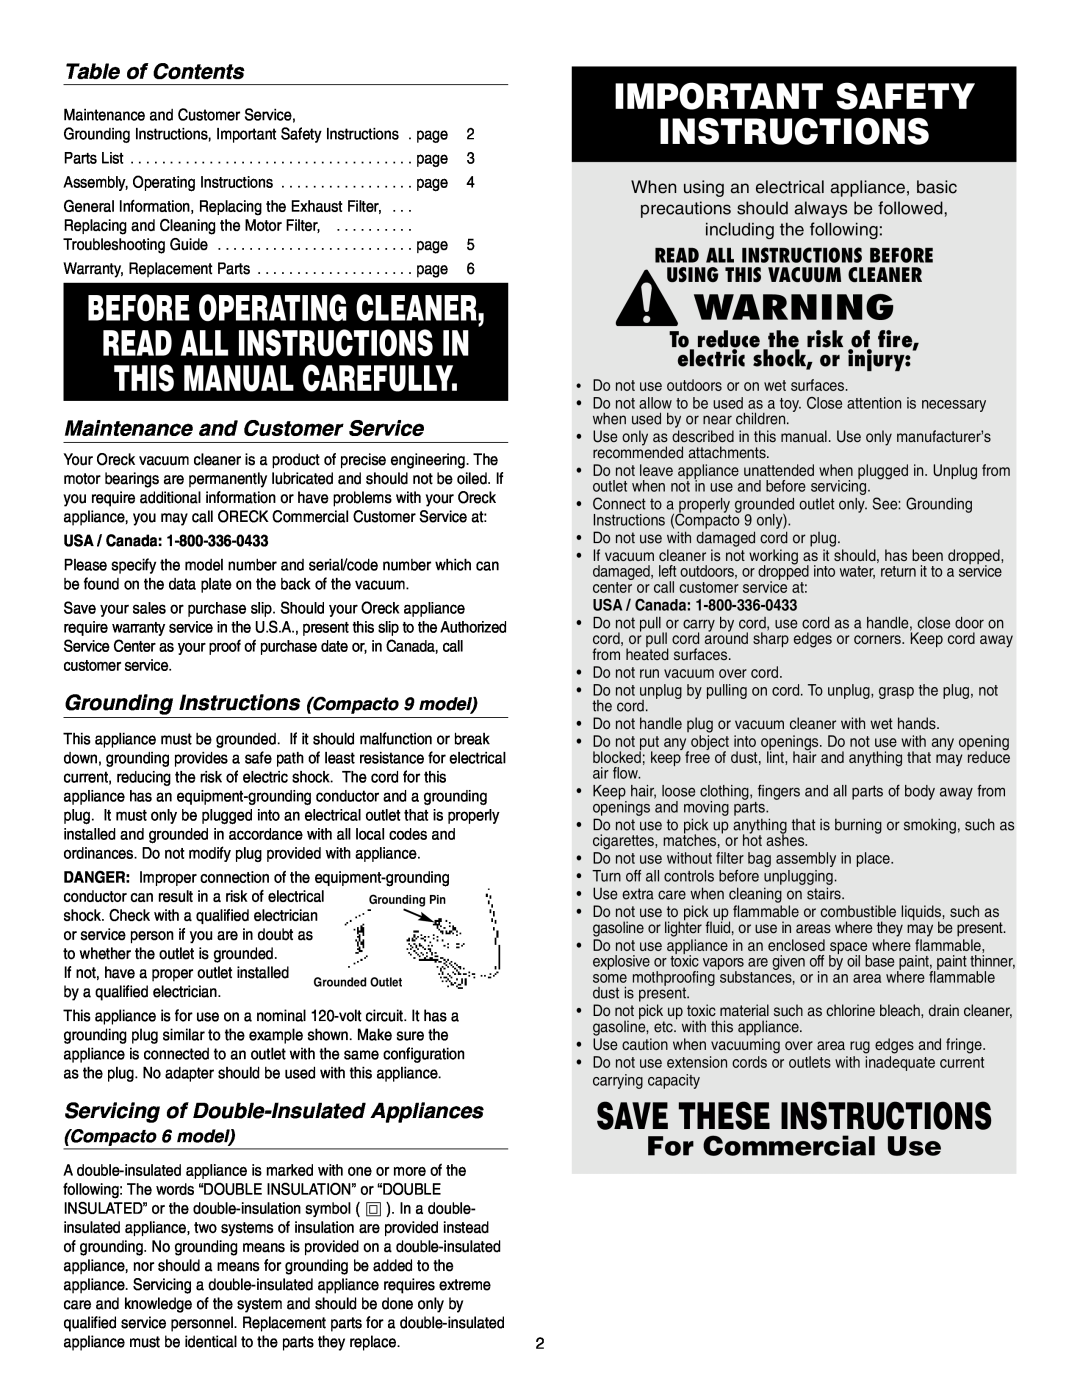 Oreck 9, 6 Save These Instructions, For Commercial Use, Table of Contents, Maintenance and Customer Service, USA / Canada 